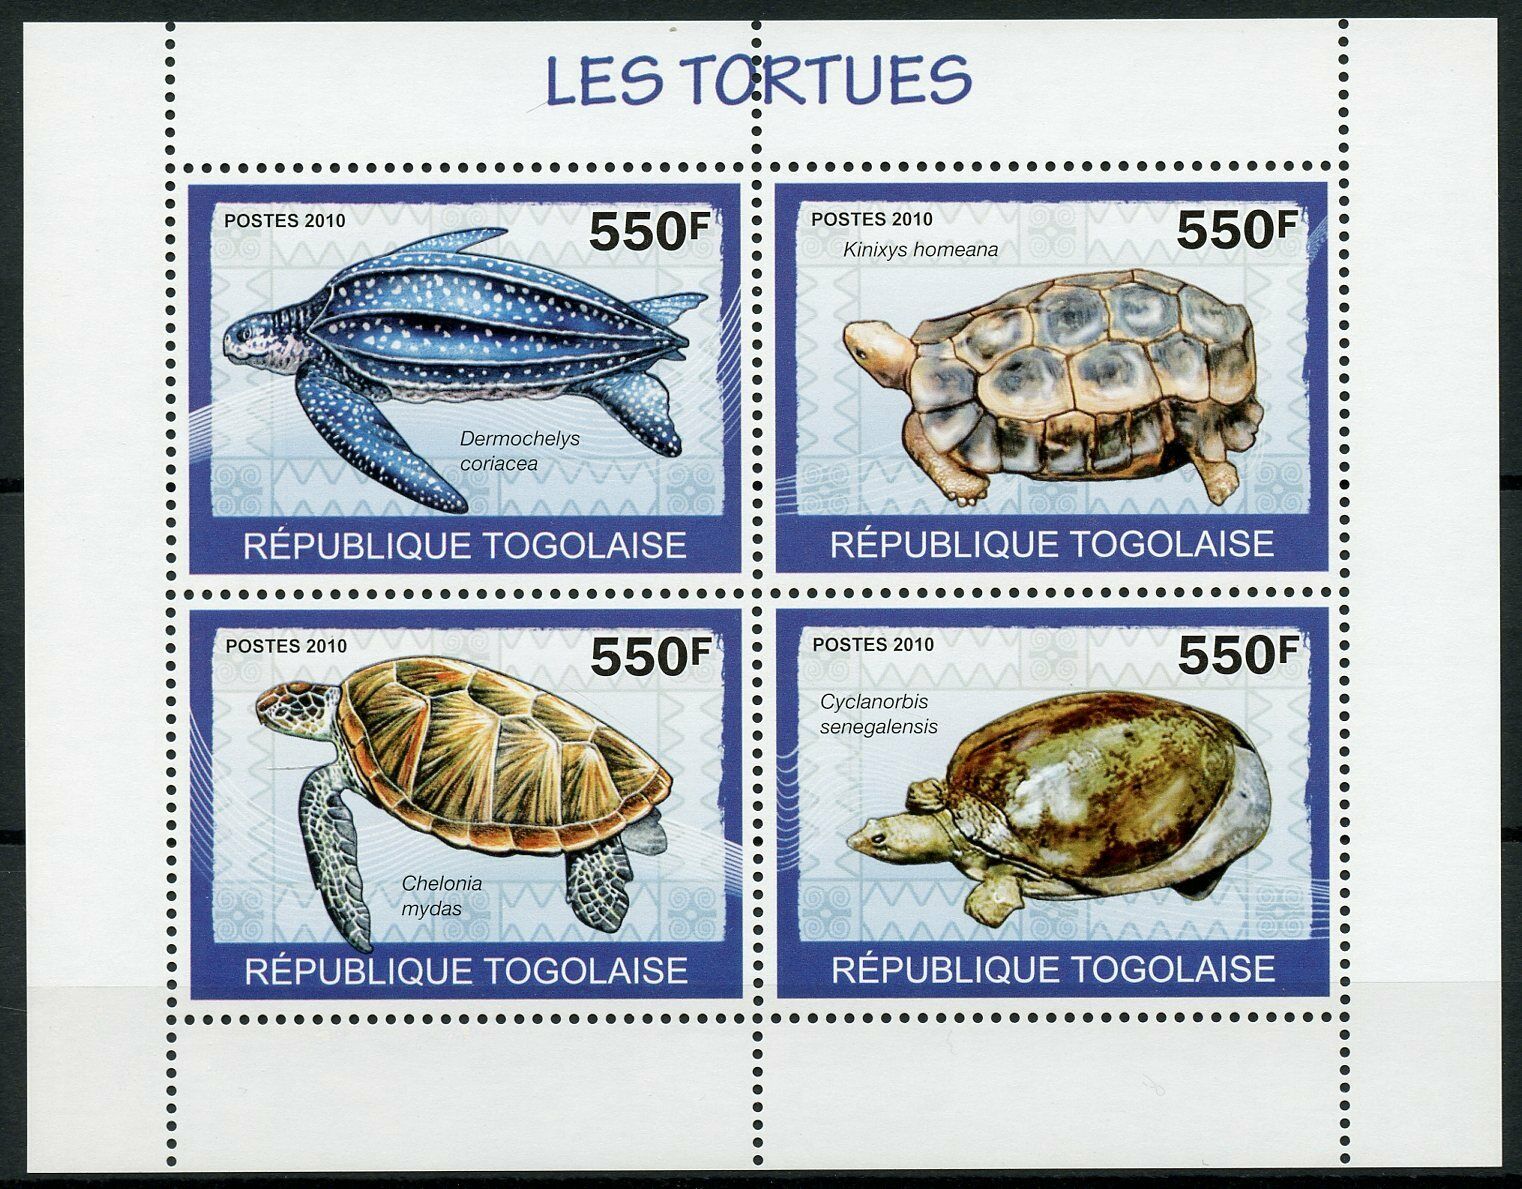 Togo Turtles Stamps 2010 MNH Green Leatherback Sea Turtle Reptiles 4v M/S